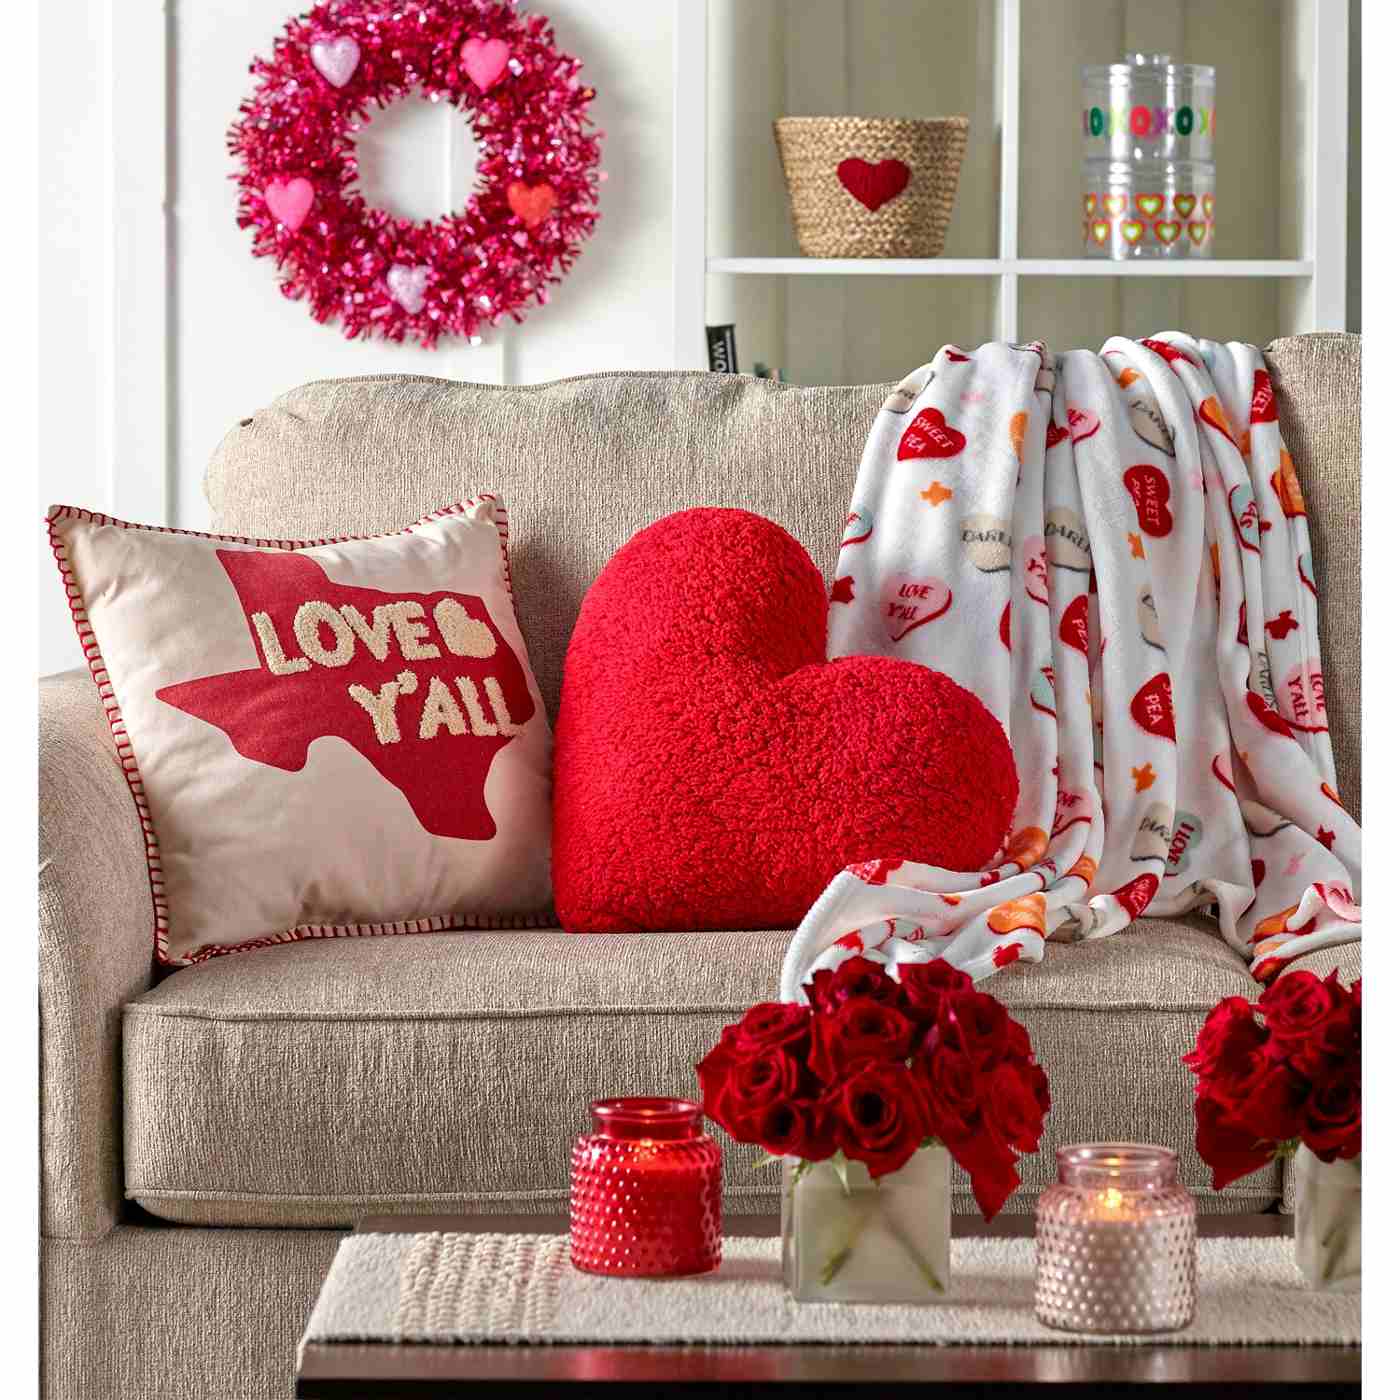 Destination Holiday Valentine's Day Sherpa Heart Pillow - Red; image 2 of 2